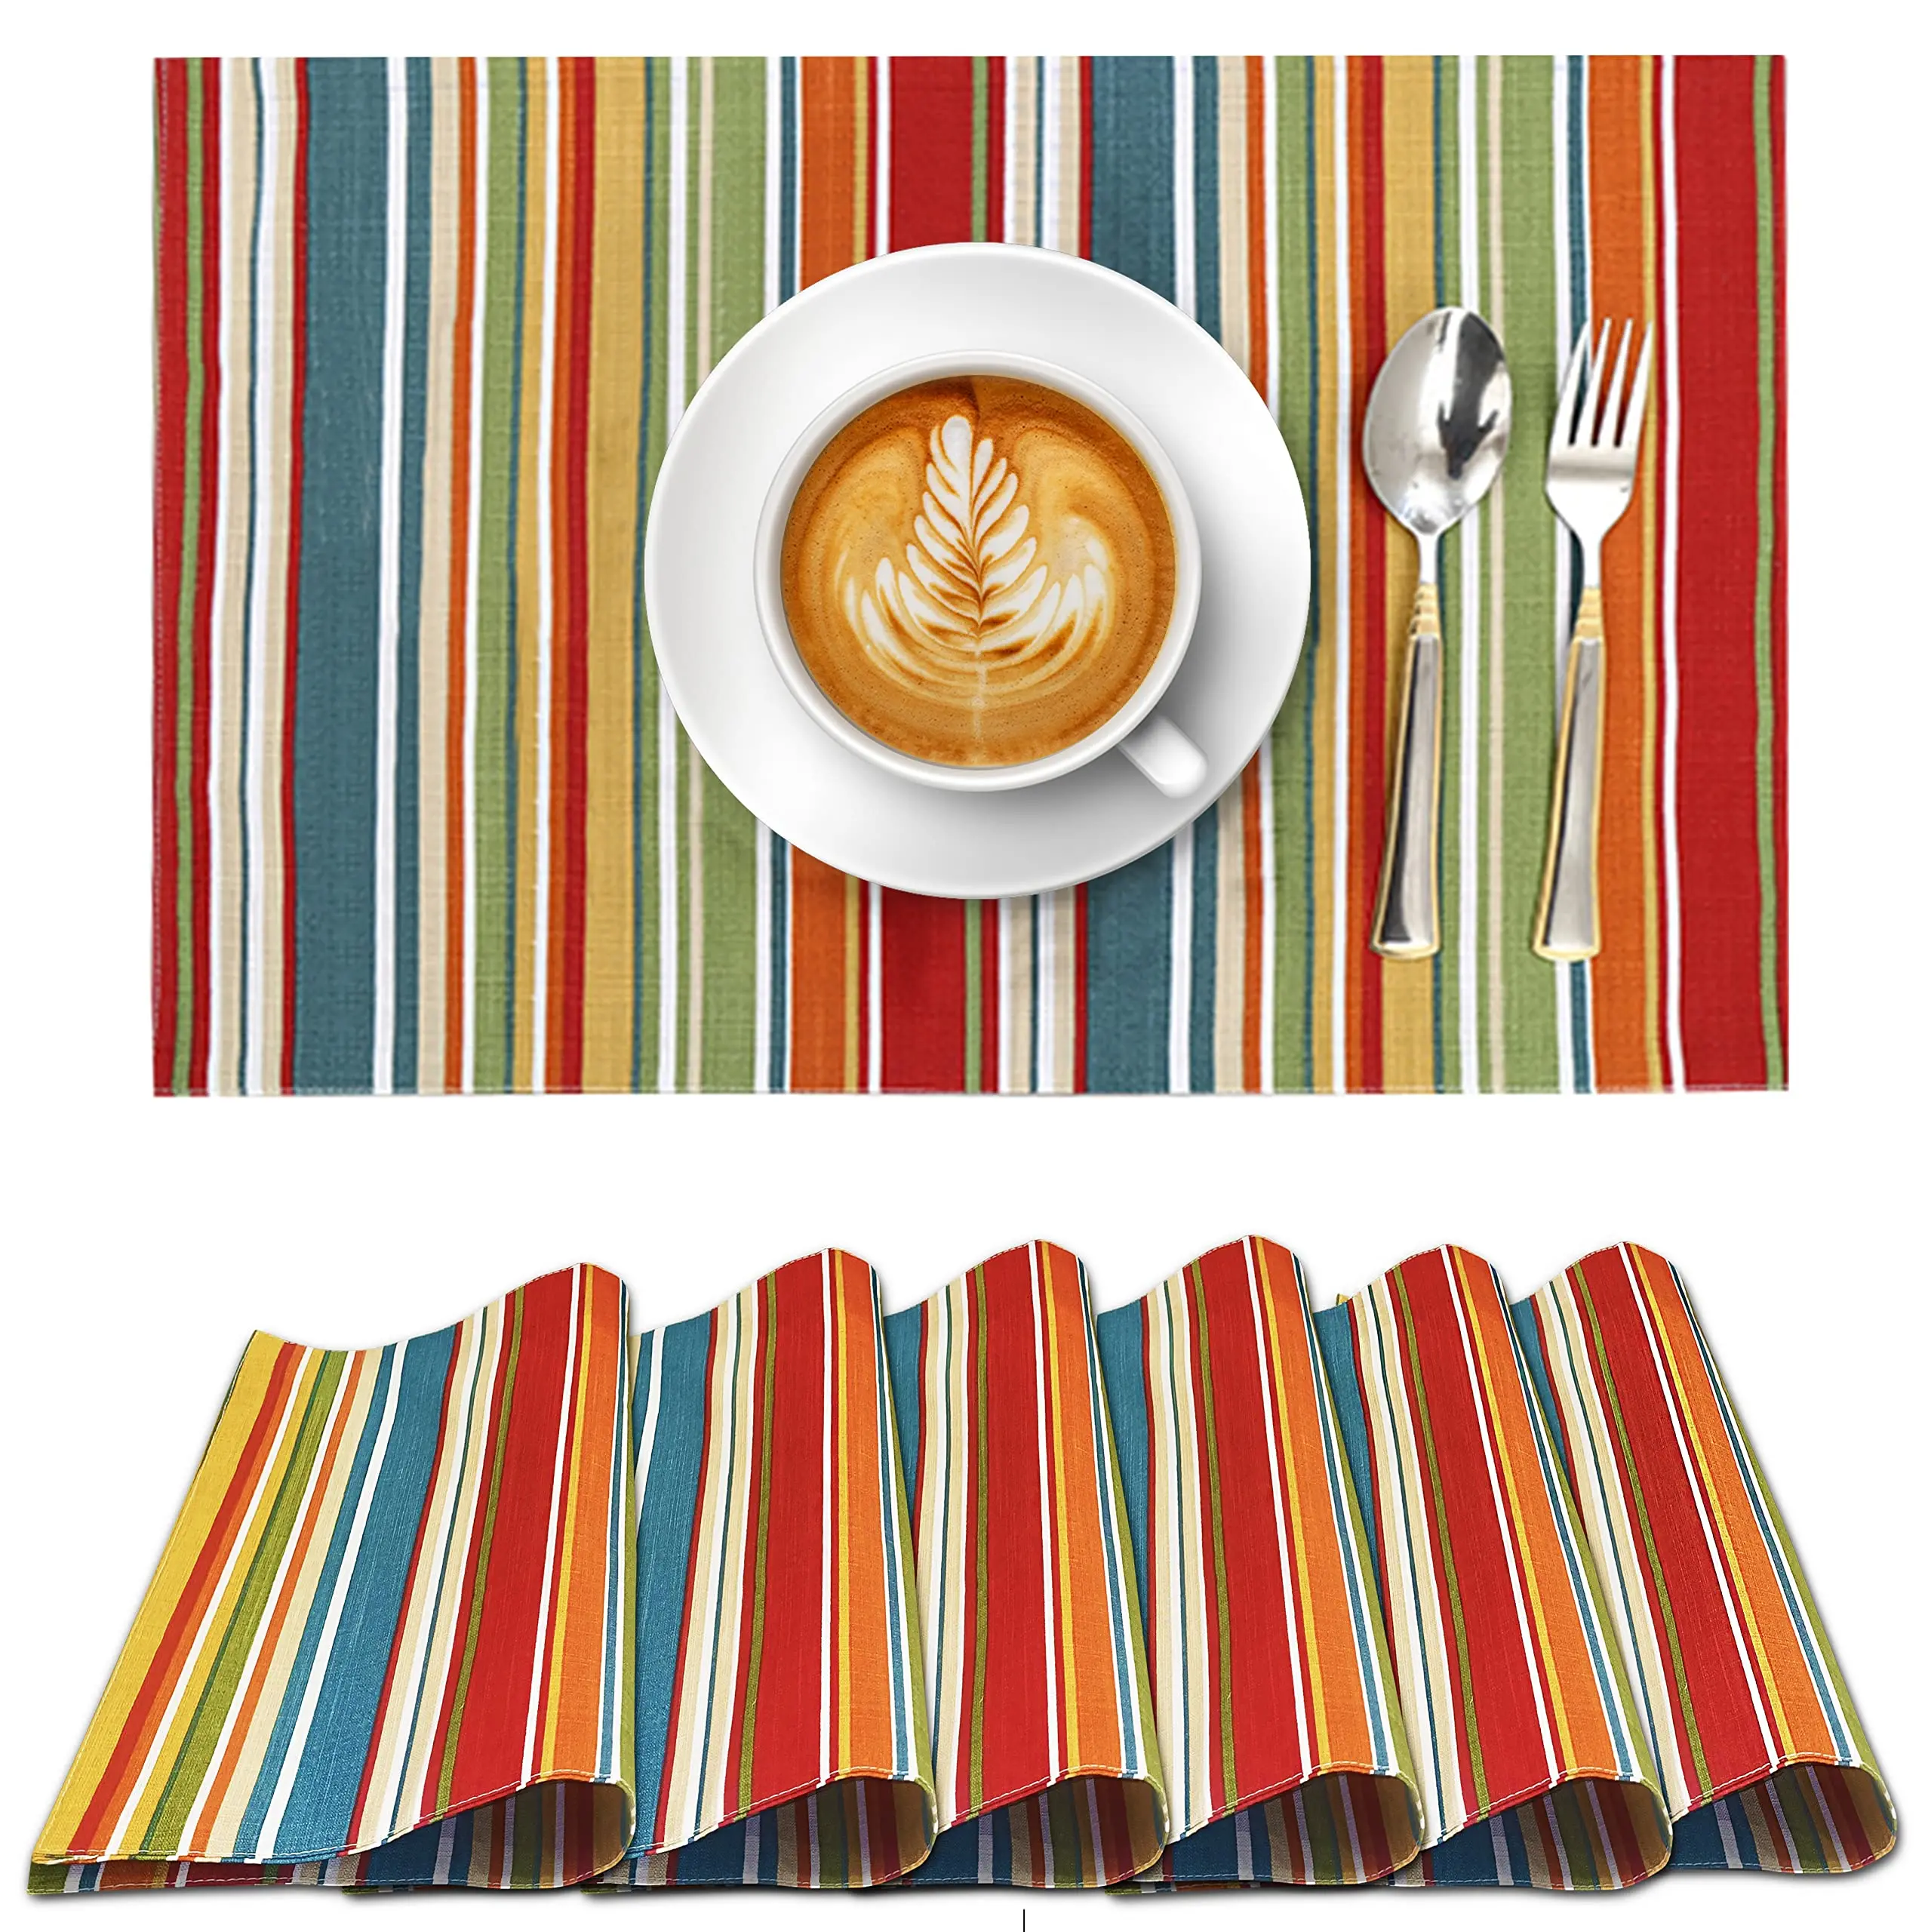 

4Pcs Stripe Placemats 13x19 Inch Dining Table Placemats Modern Place Mats Table Decor Kitchen Table Dinners Linens Coffee Mat